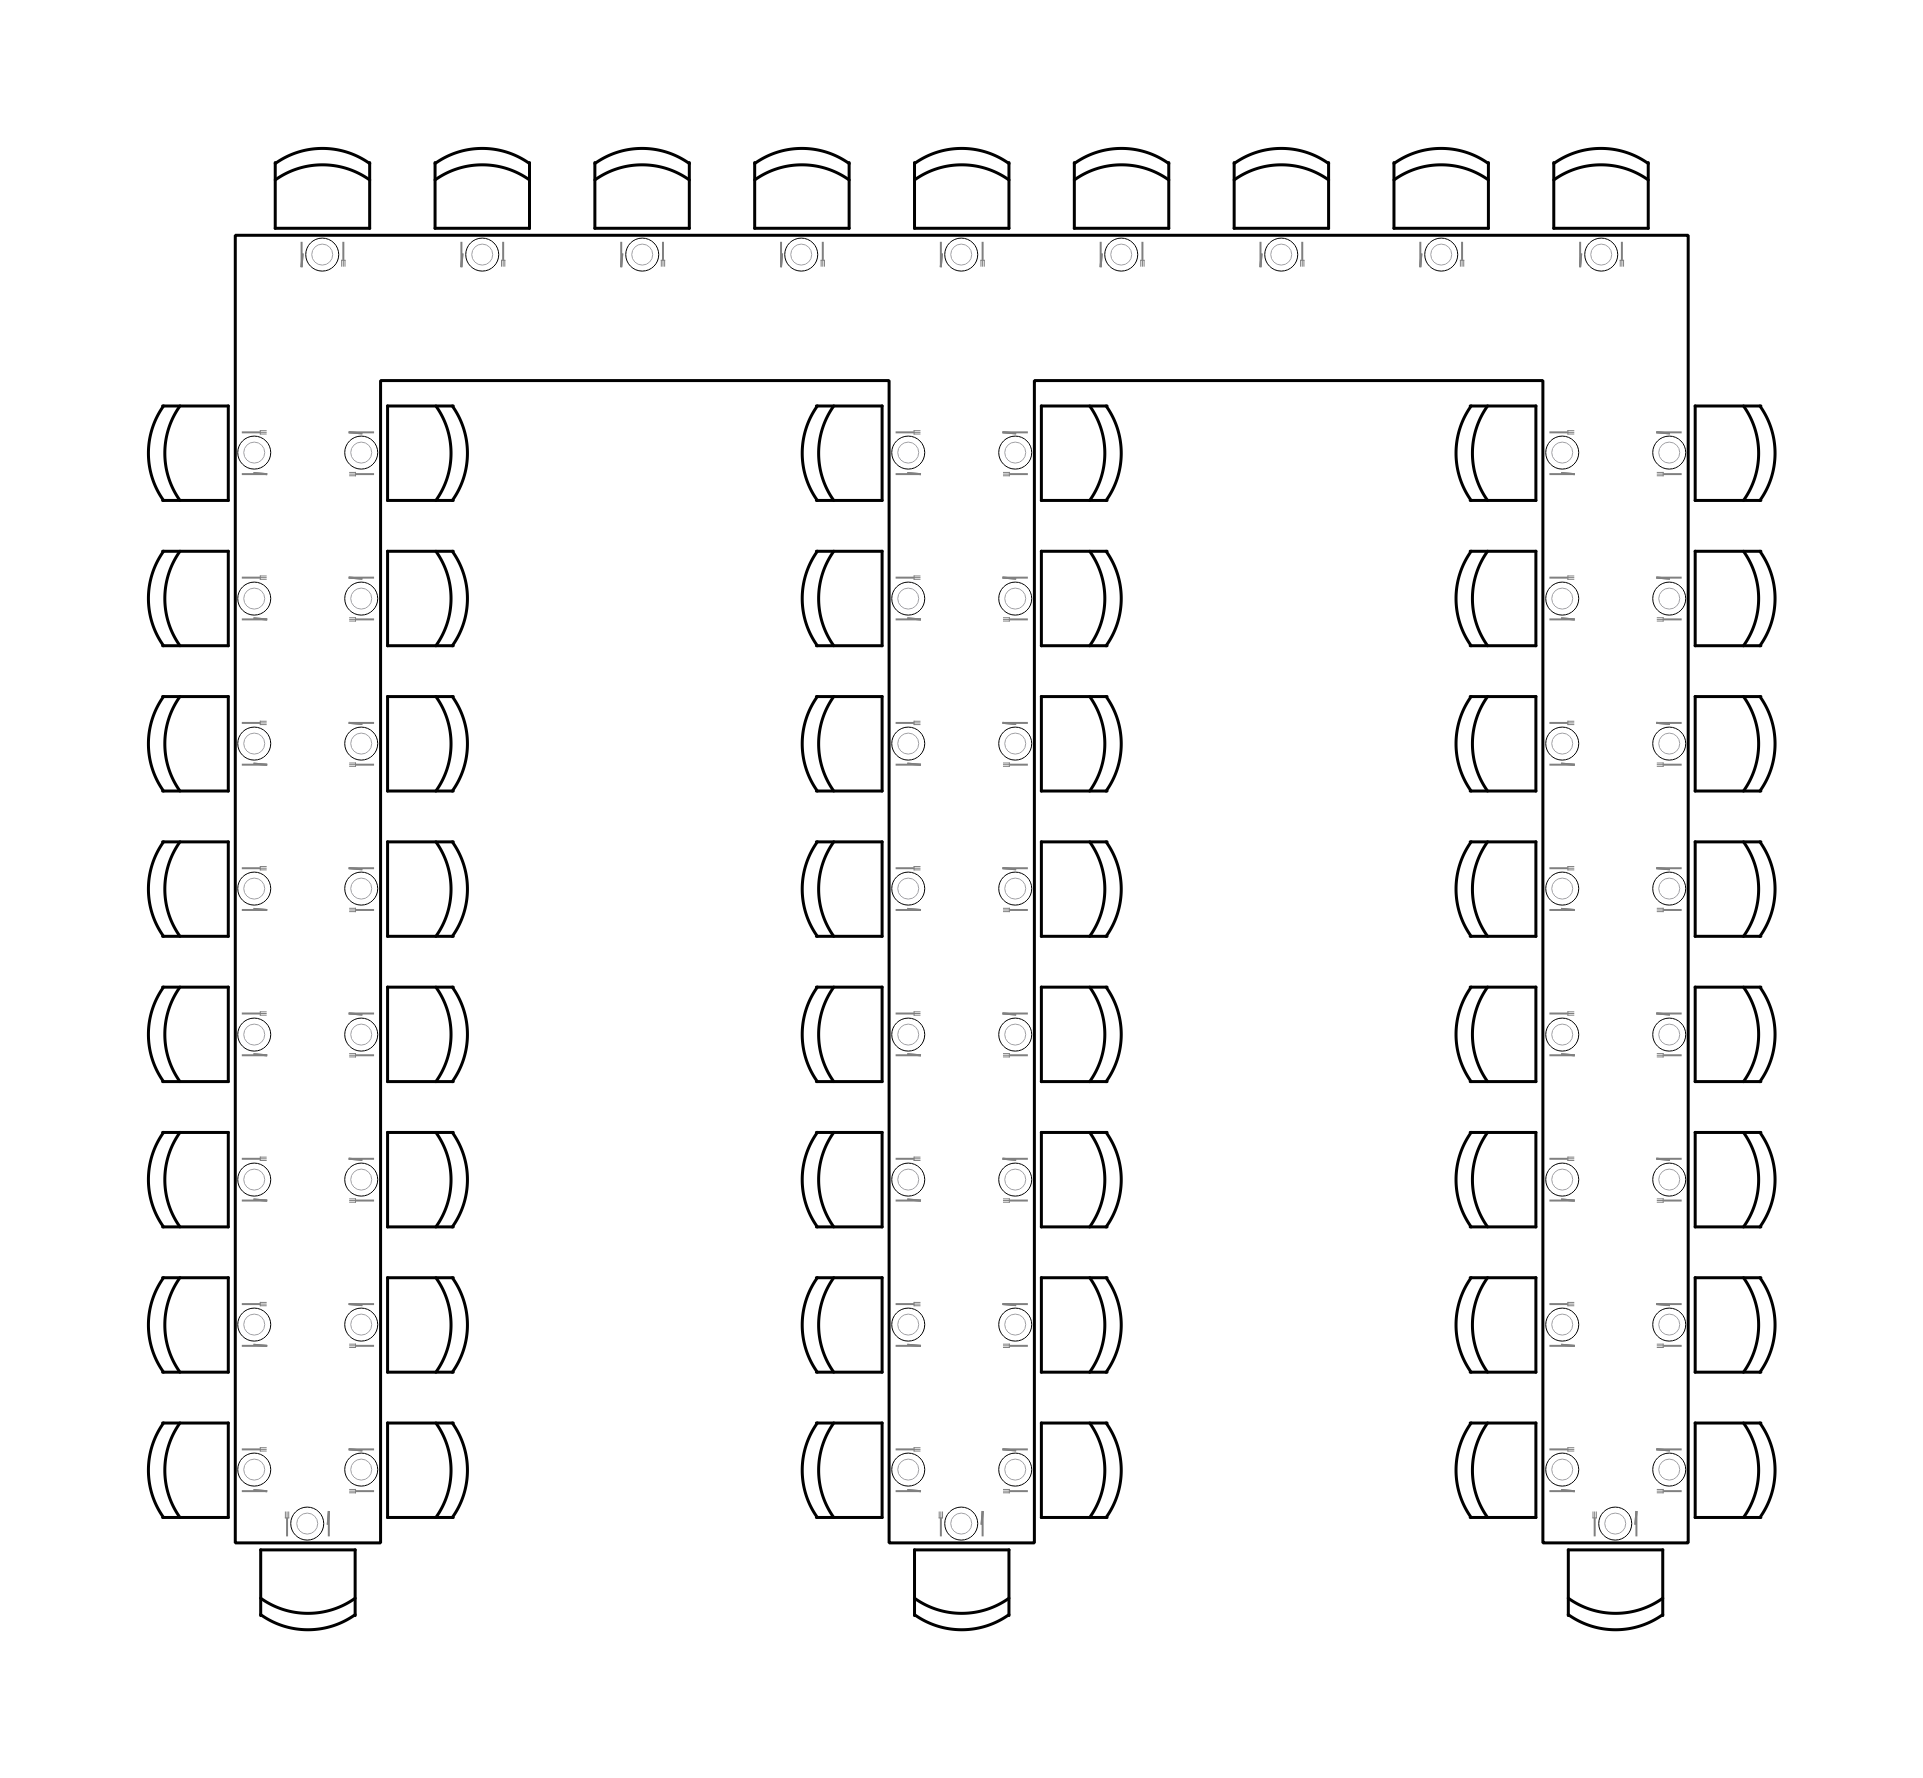 Seating Arrangement Template from www.perfecttableplan.com